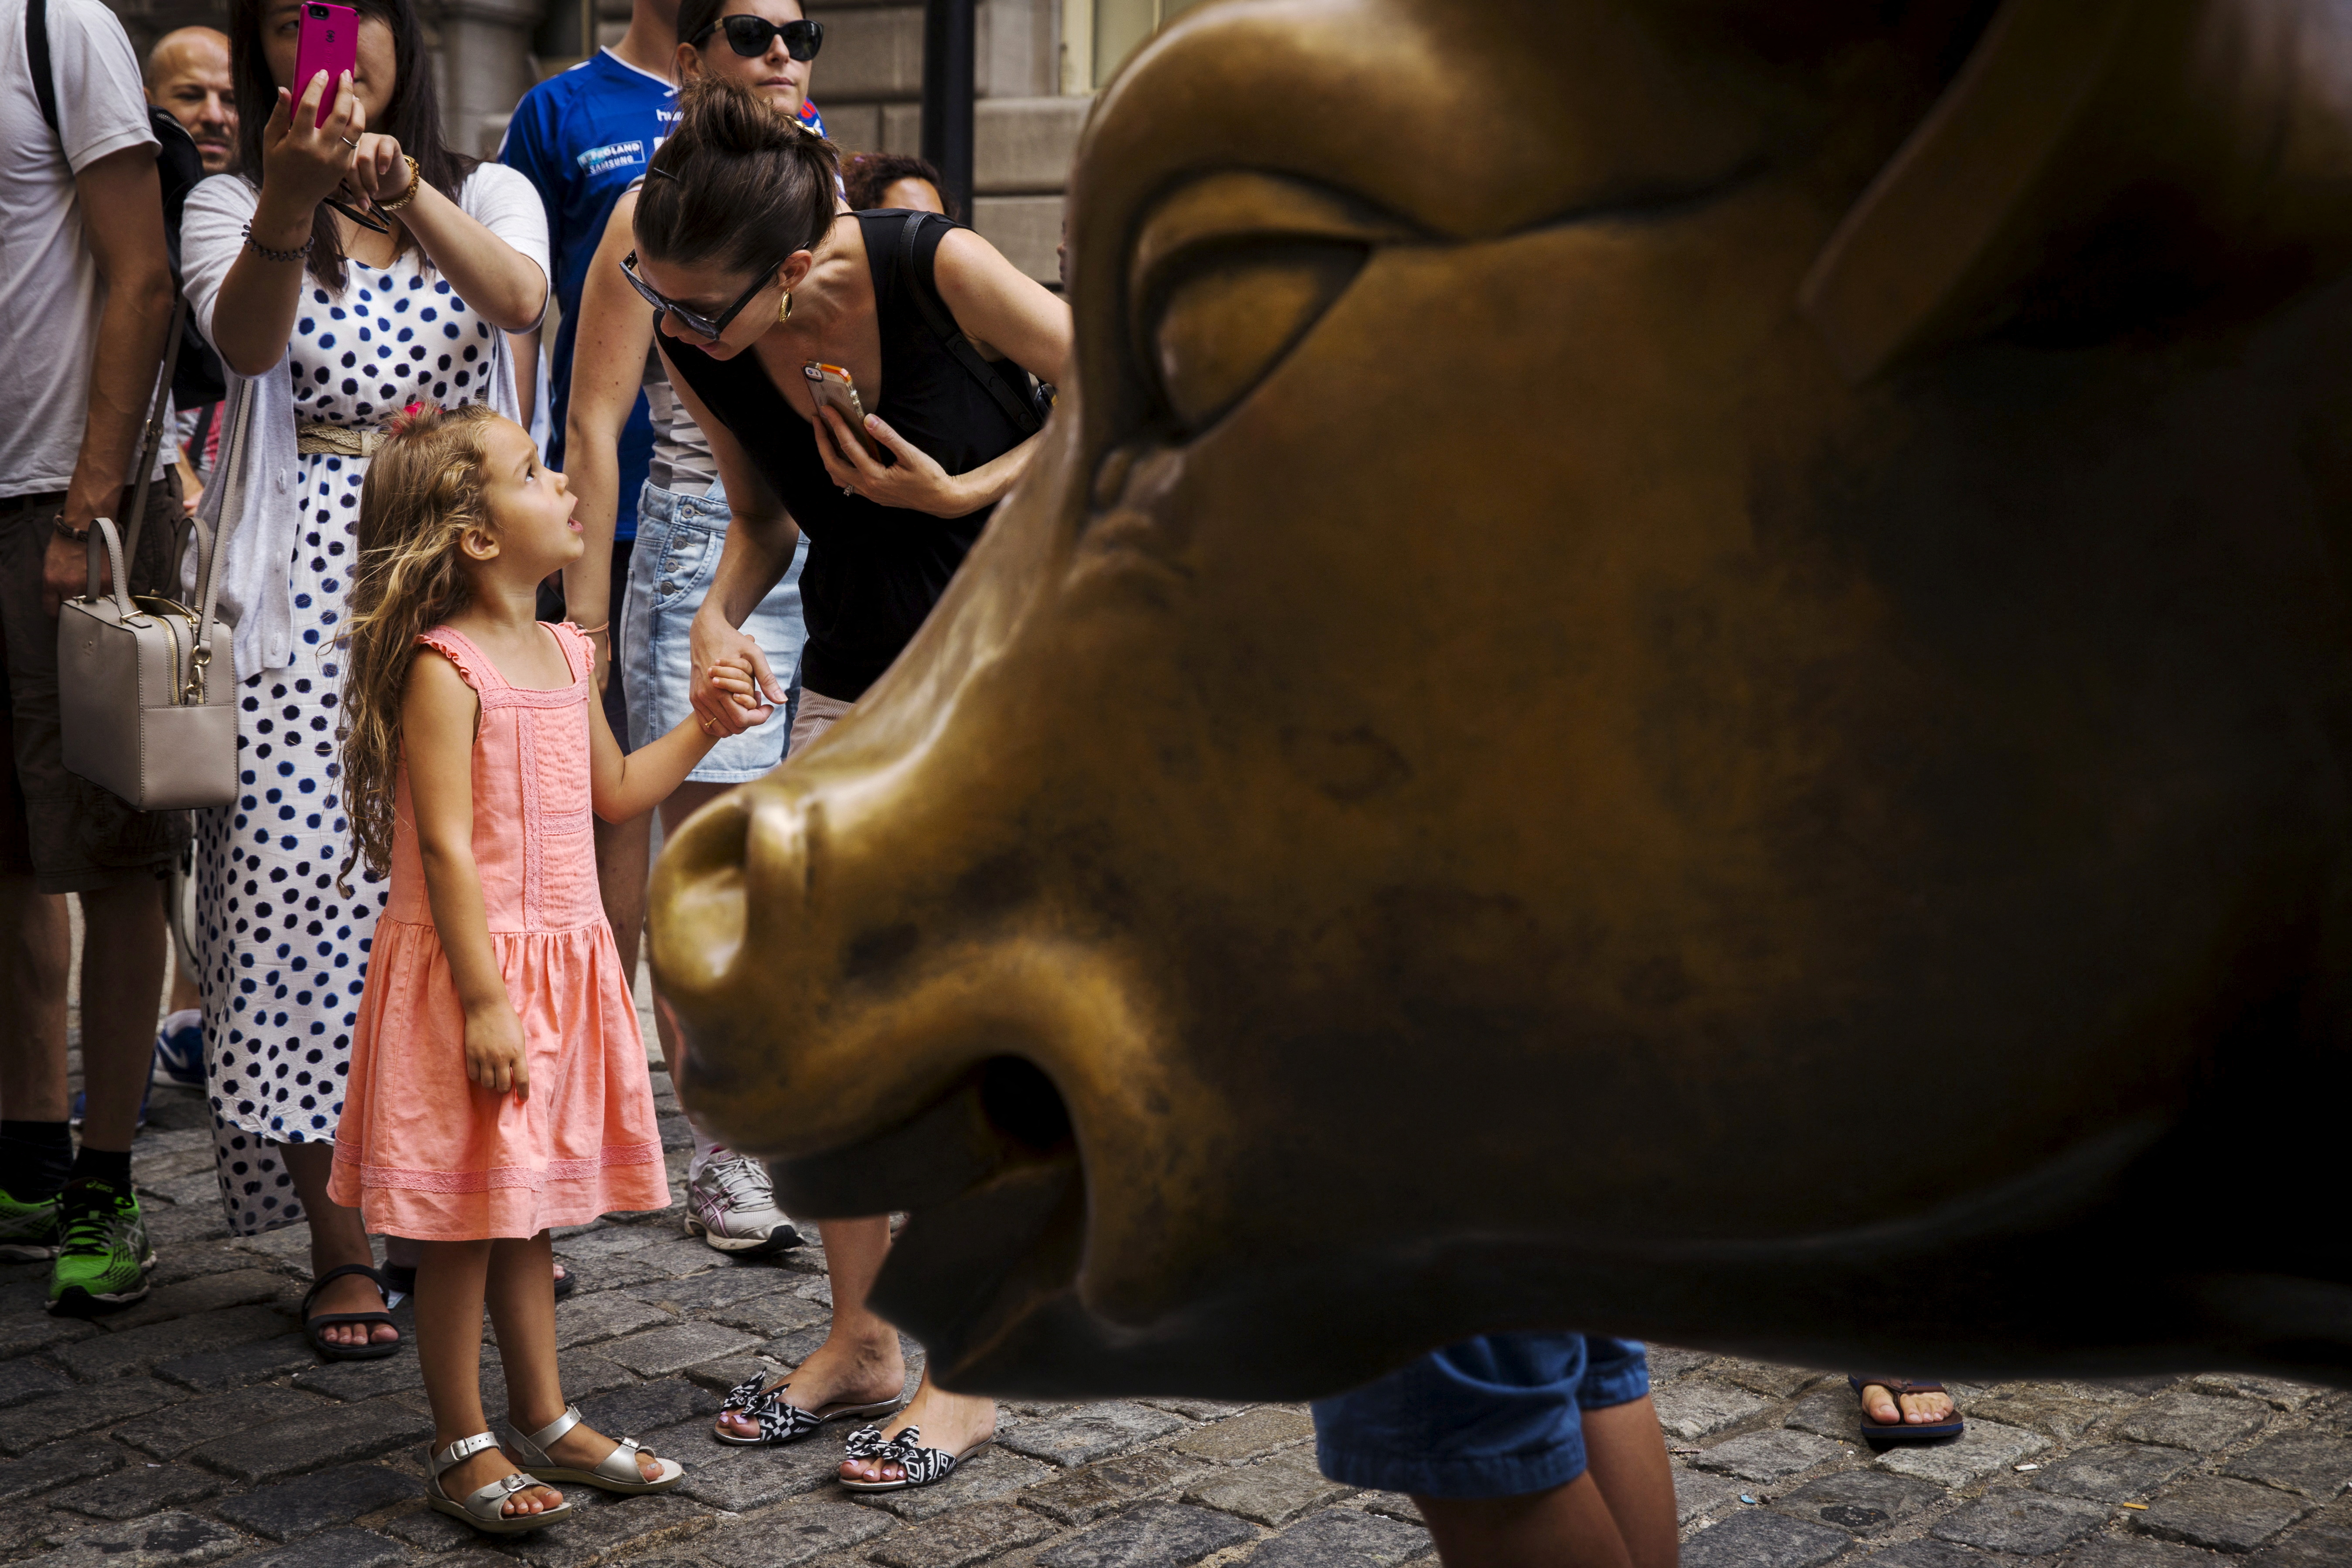 A girl speaks with her mother near a landmark statue of a bull in New York